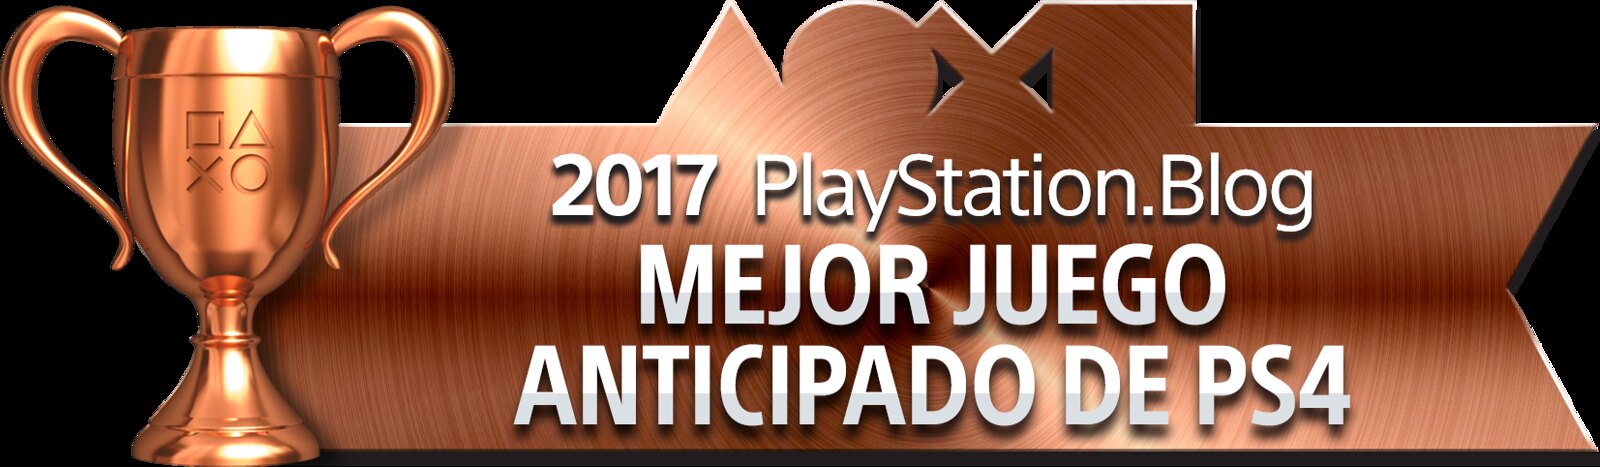 PlayStation Blog Game of the Year 2017 - Most Anticipated PS4 Title (Bronze)